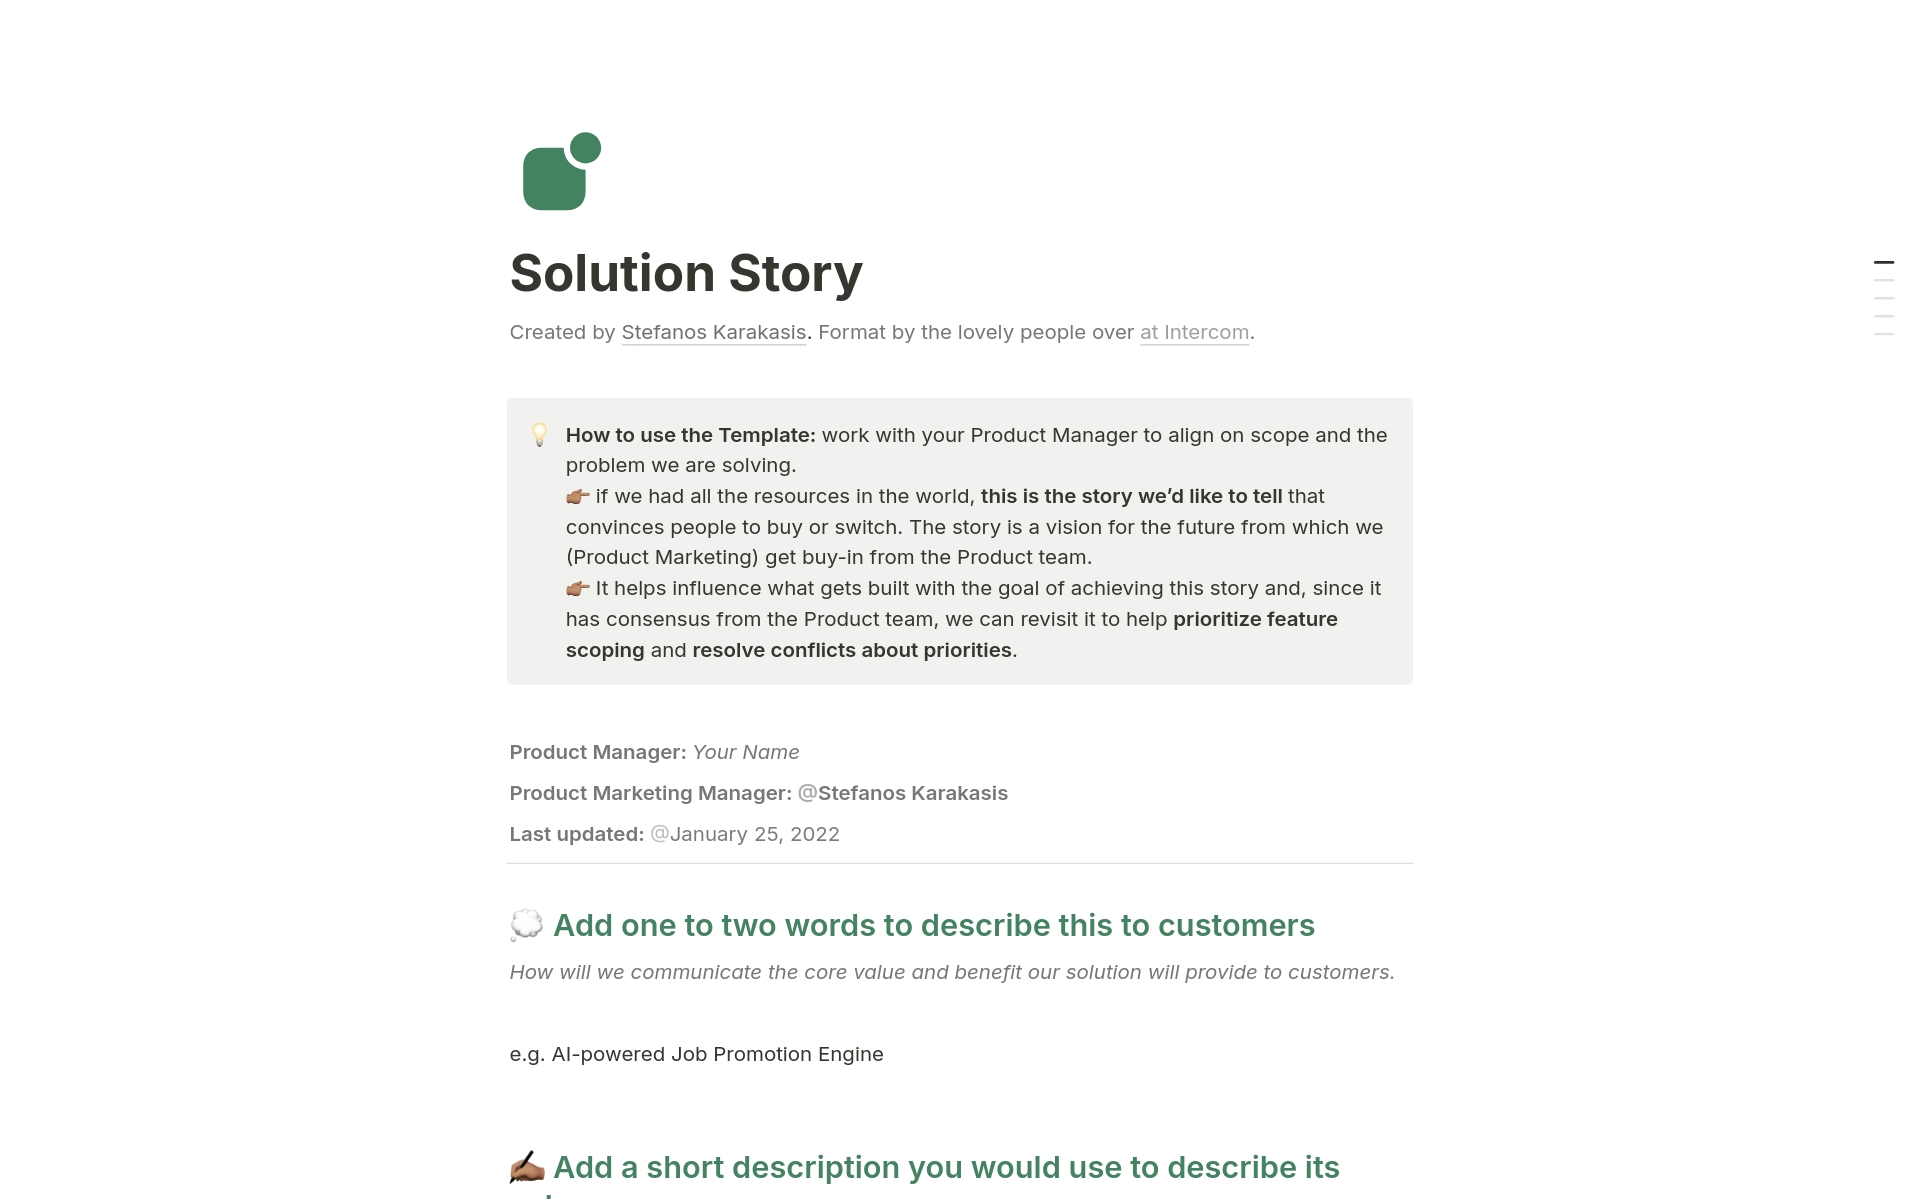 Solution Story: One-Page Product Messaging Briefのテンプレートのプレビュー